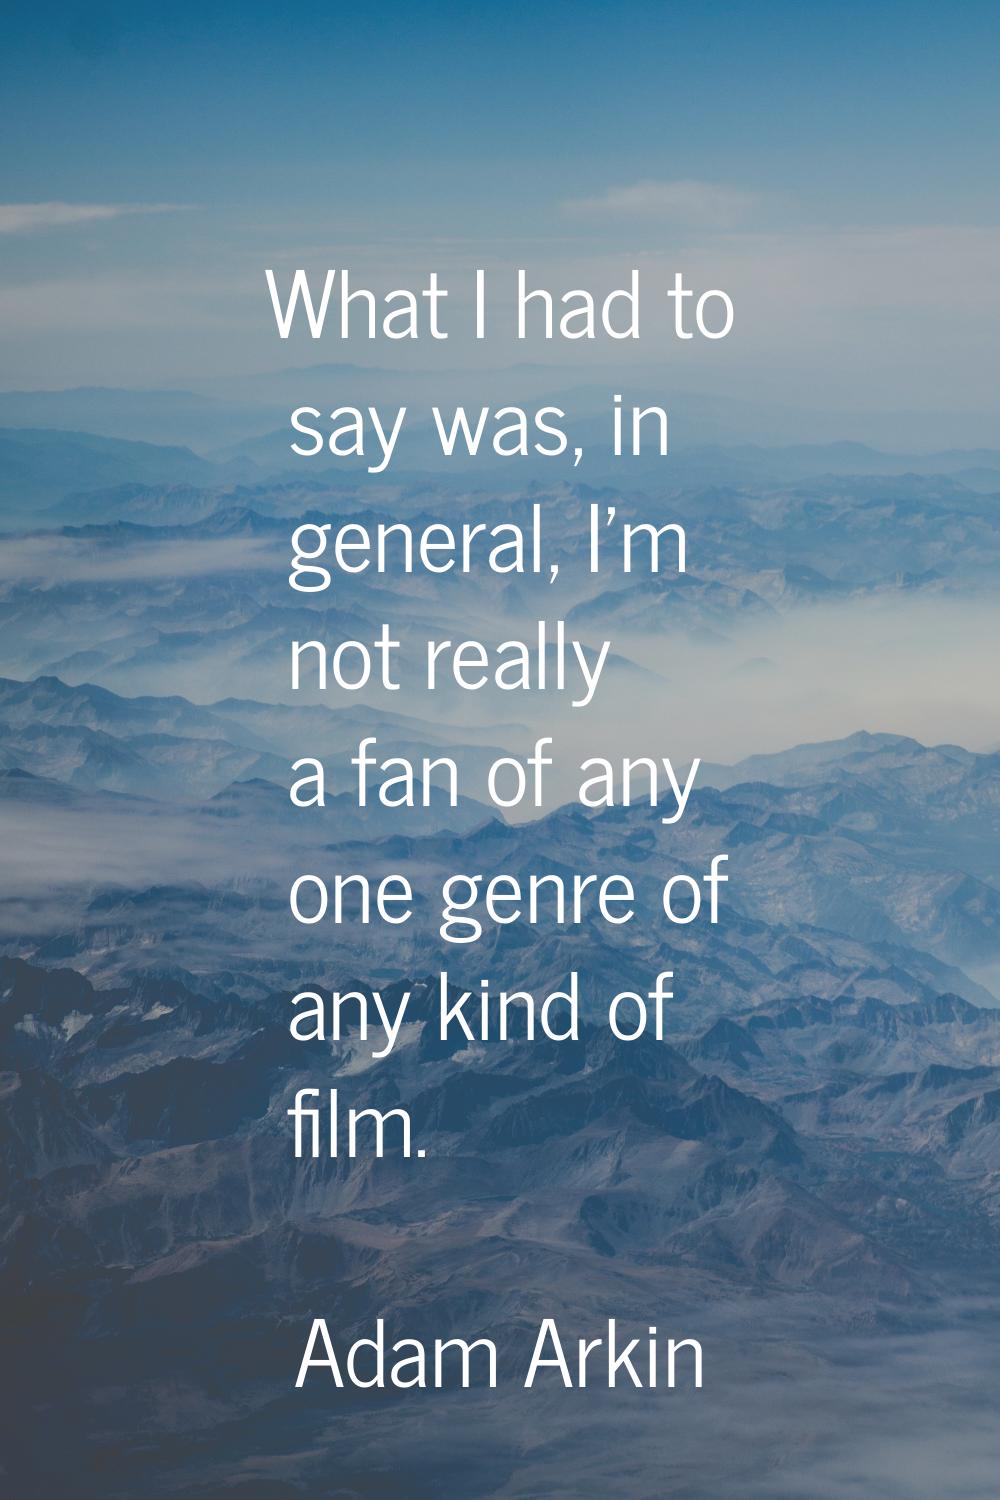 What I had to say was, in general, I'm not really a fan of any one genre of any kind of film.